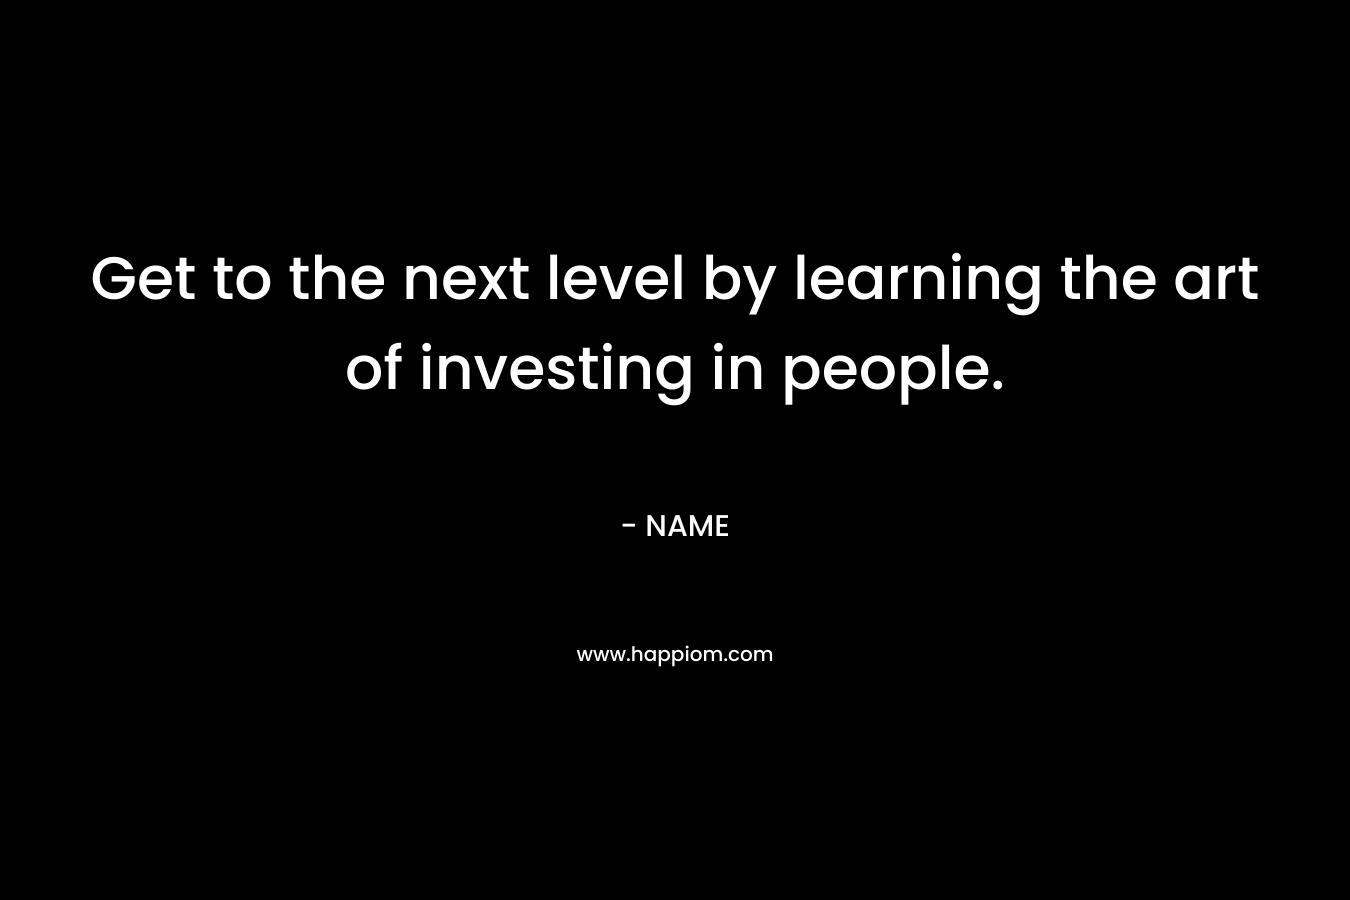 Get to the next level by learning the art of investing in people.